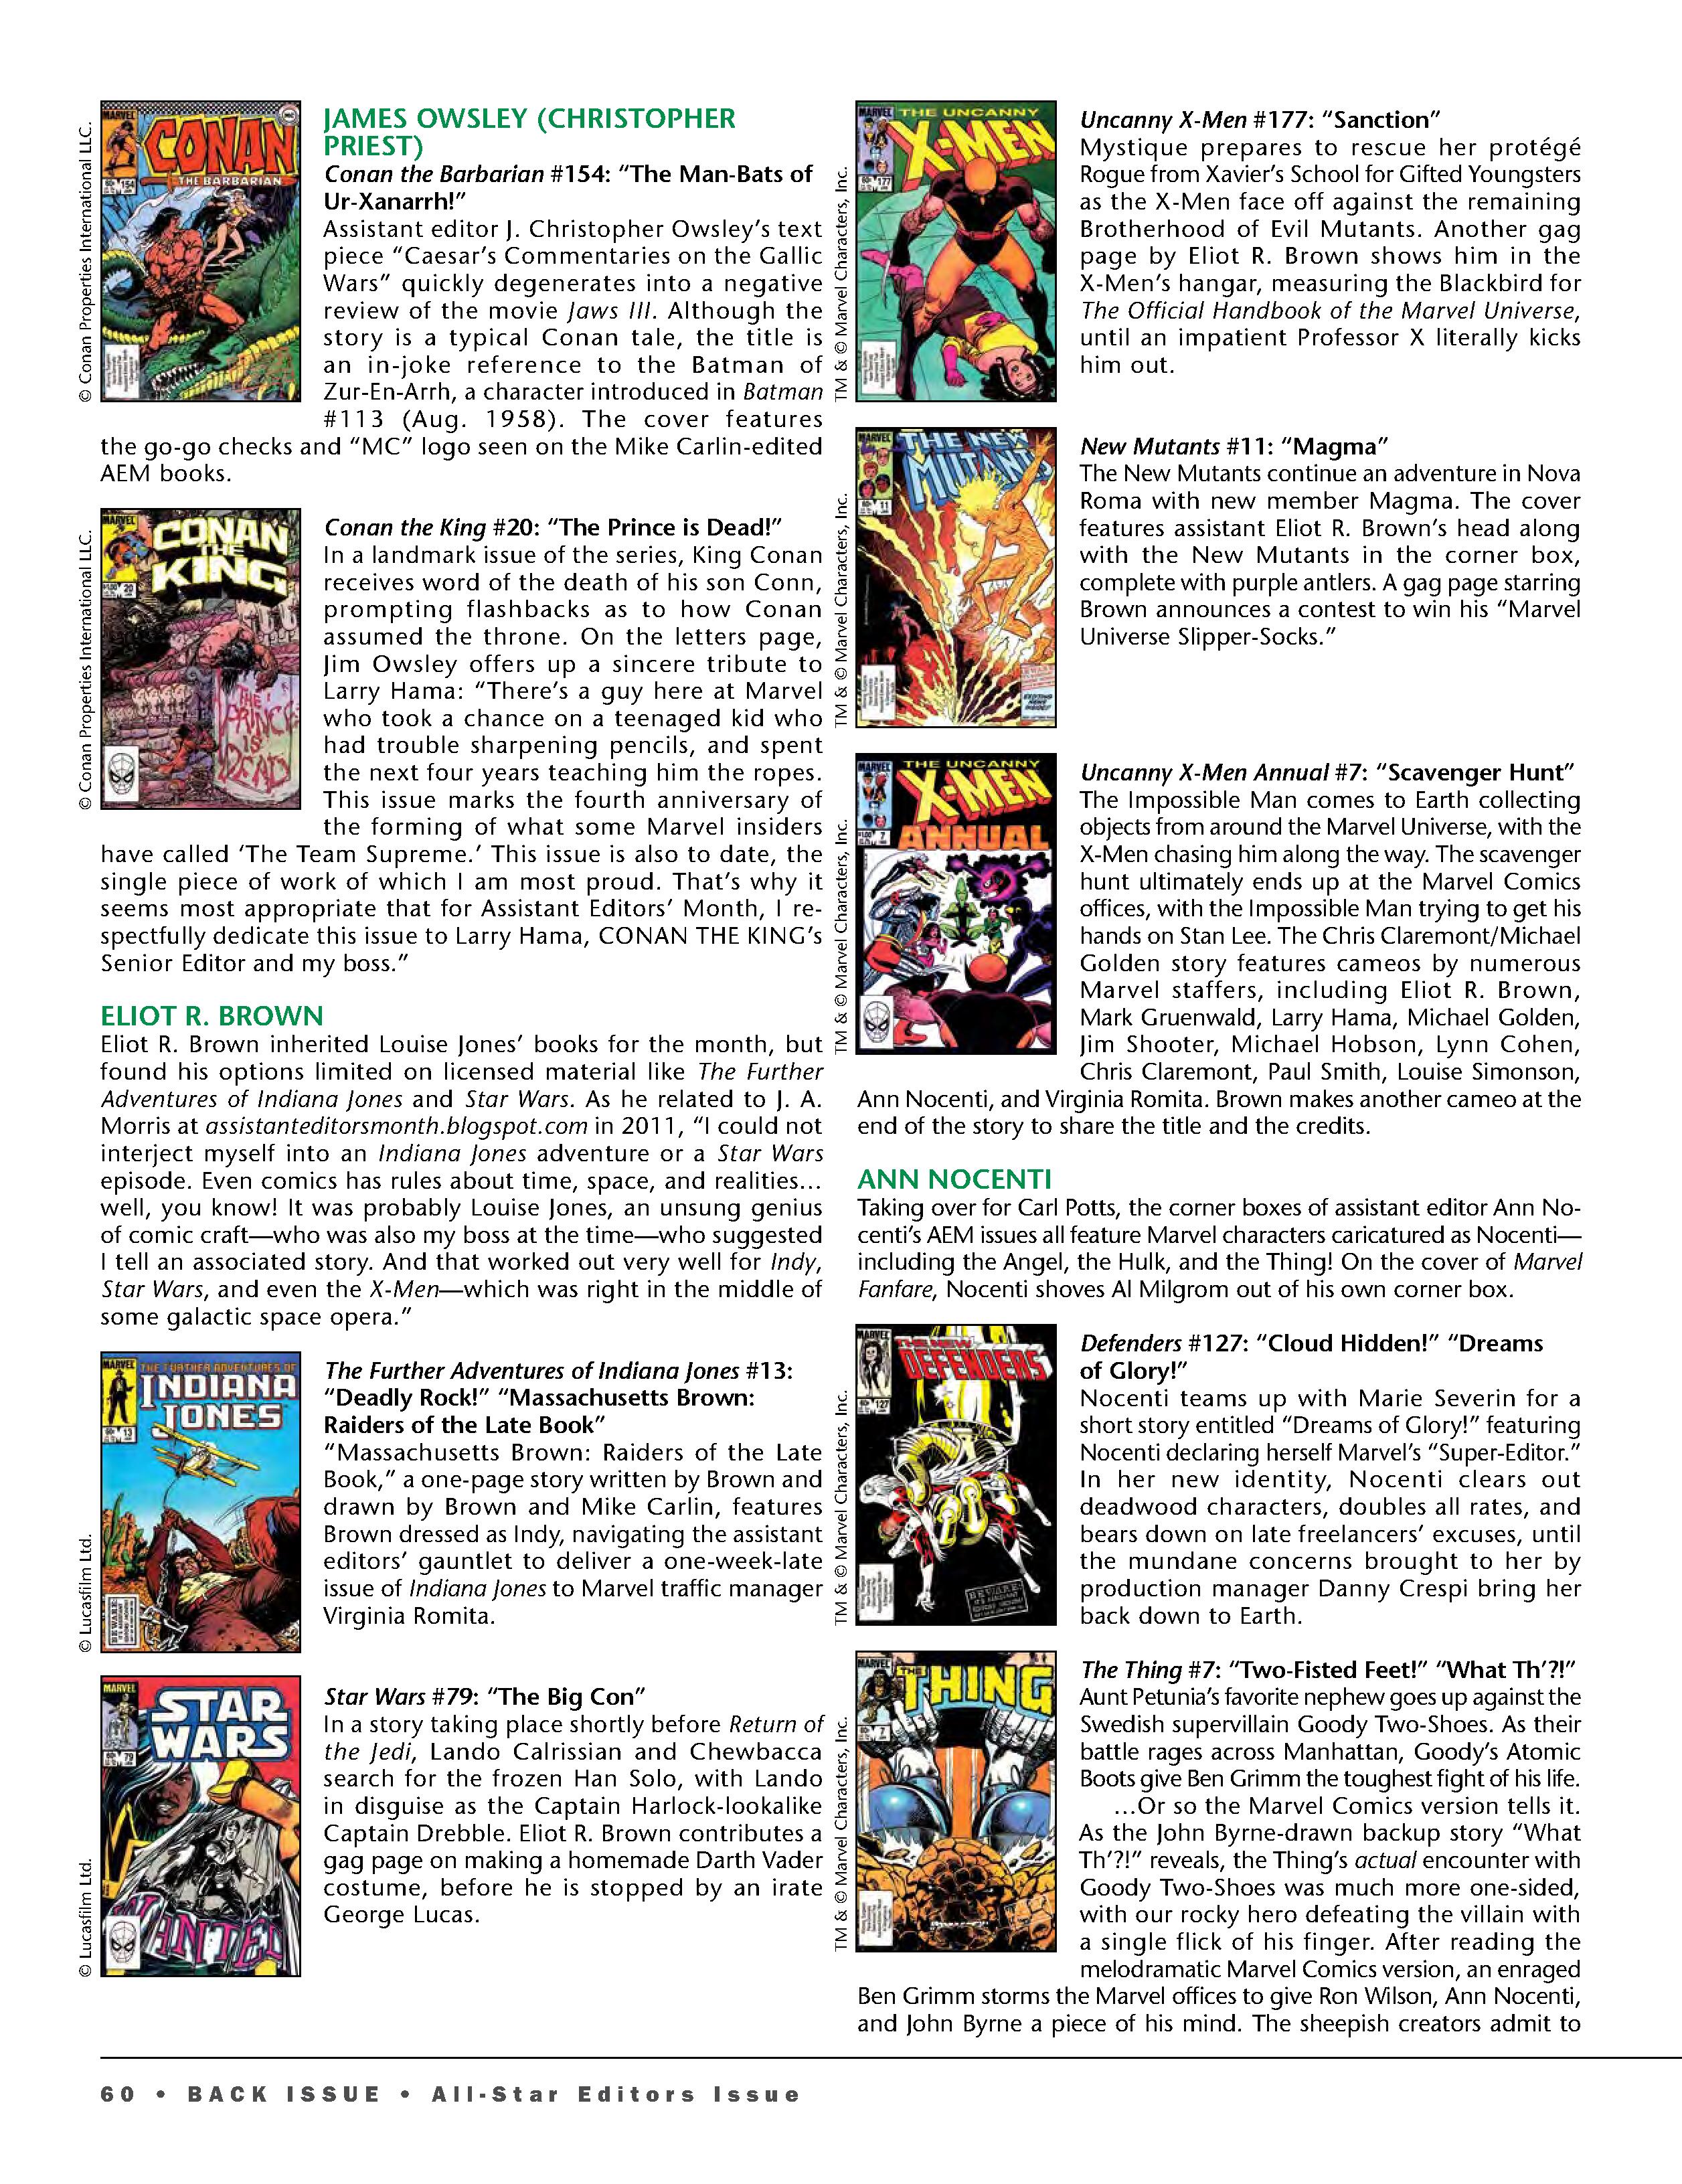 Read online Back Issue comic -  Issue #103 - 62